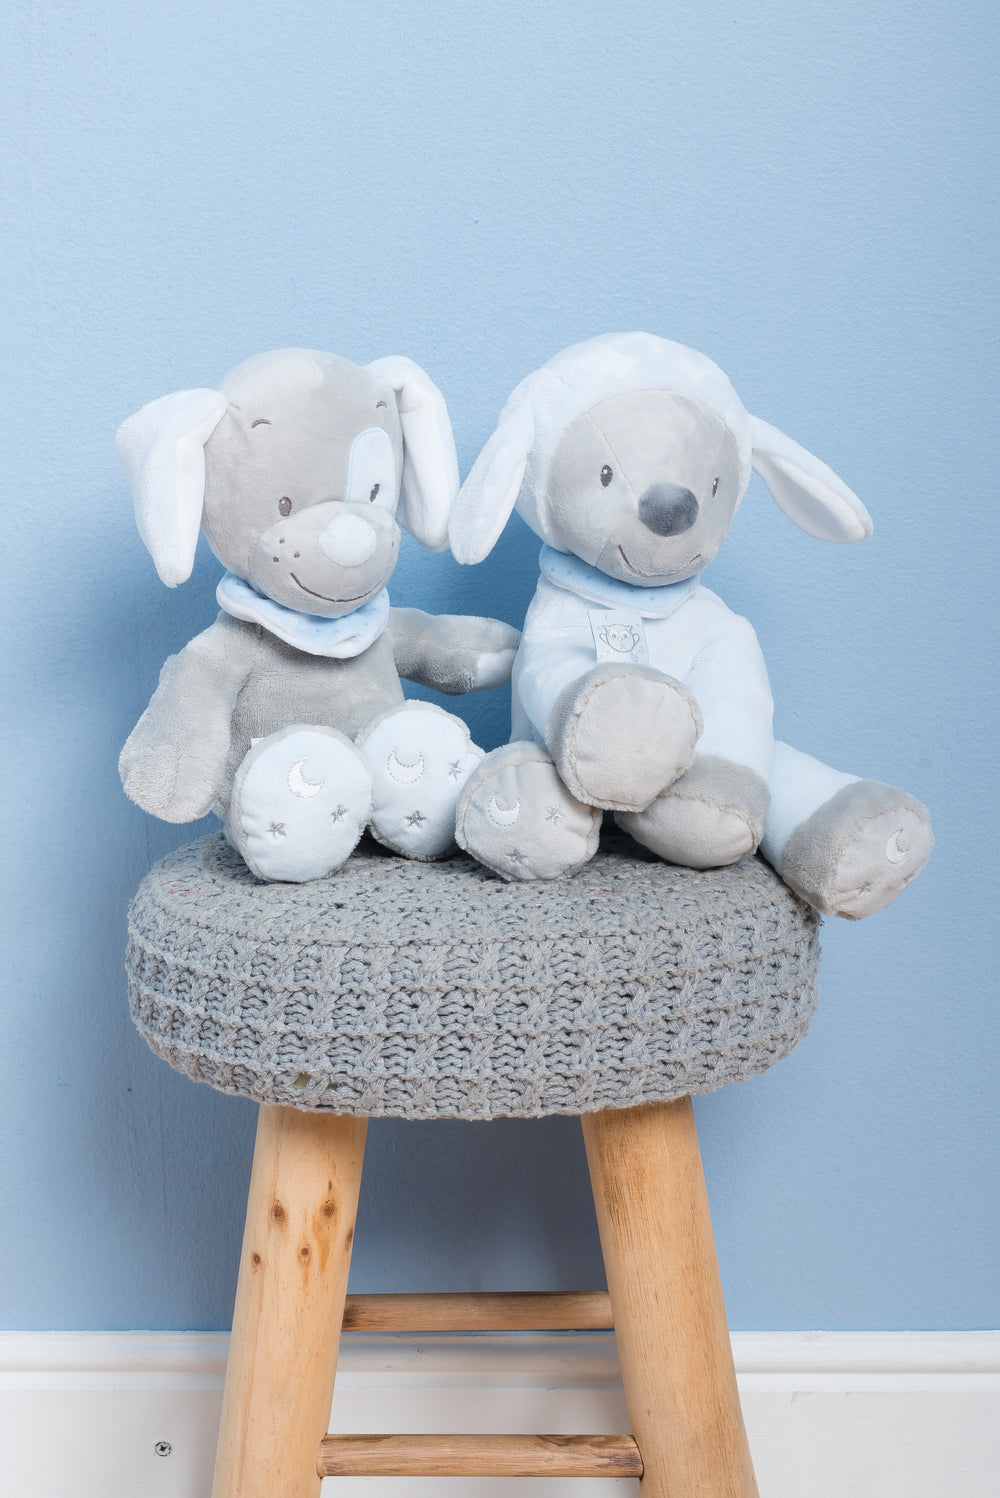 Sam & Toby Collection - Cuddly Sam The Sheep